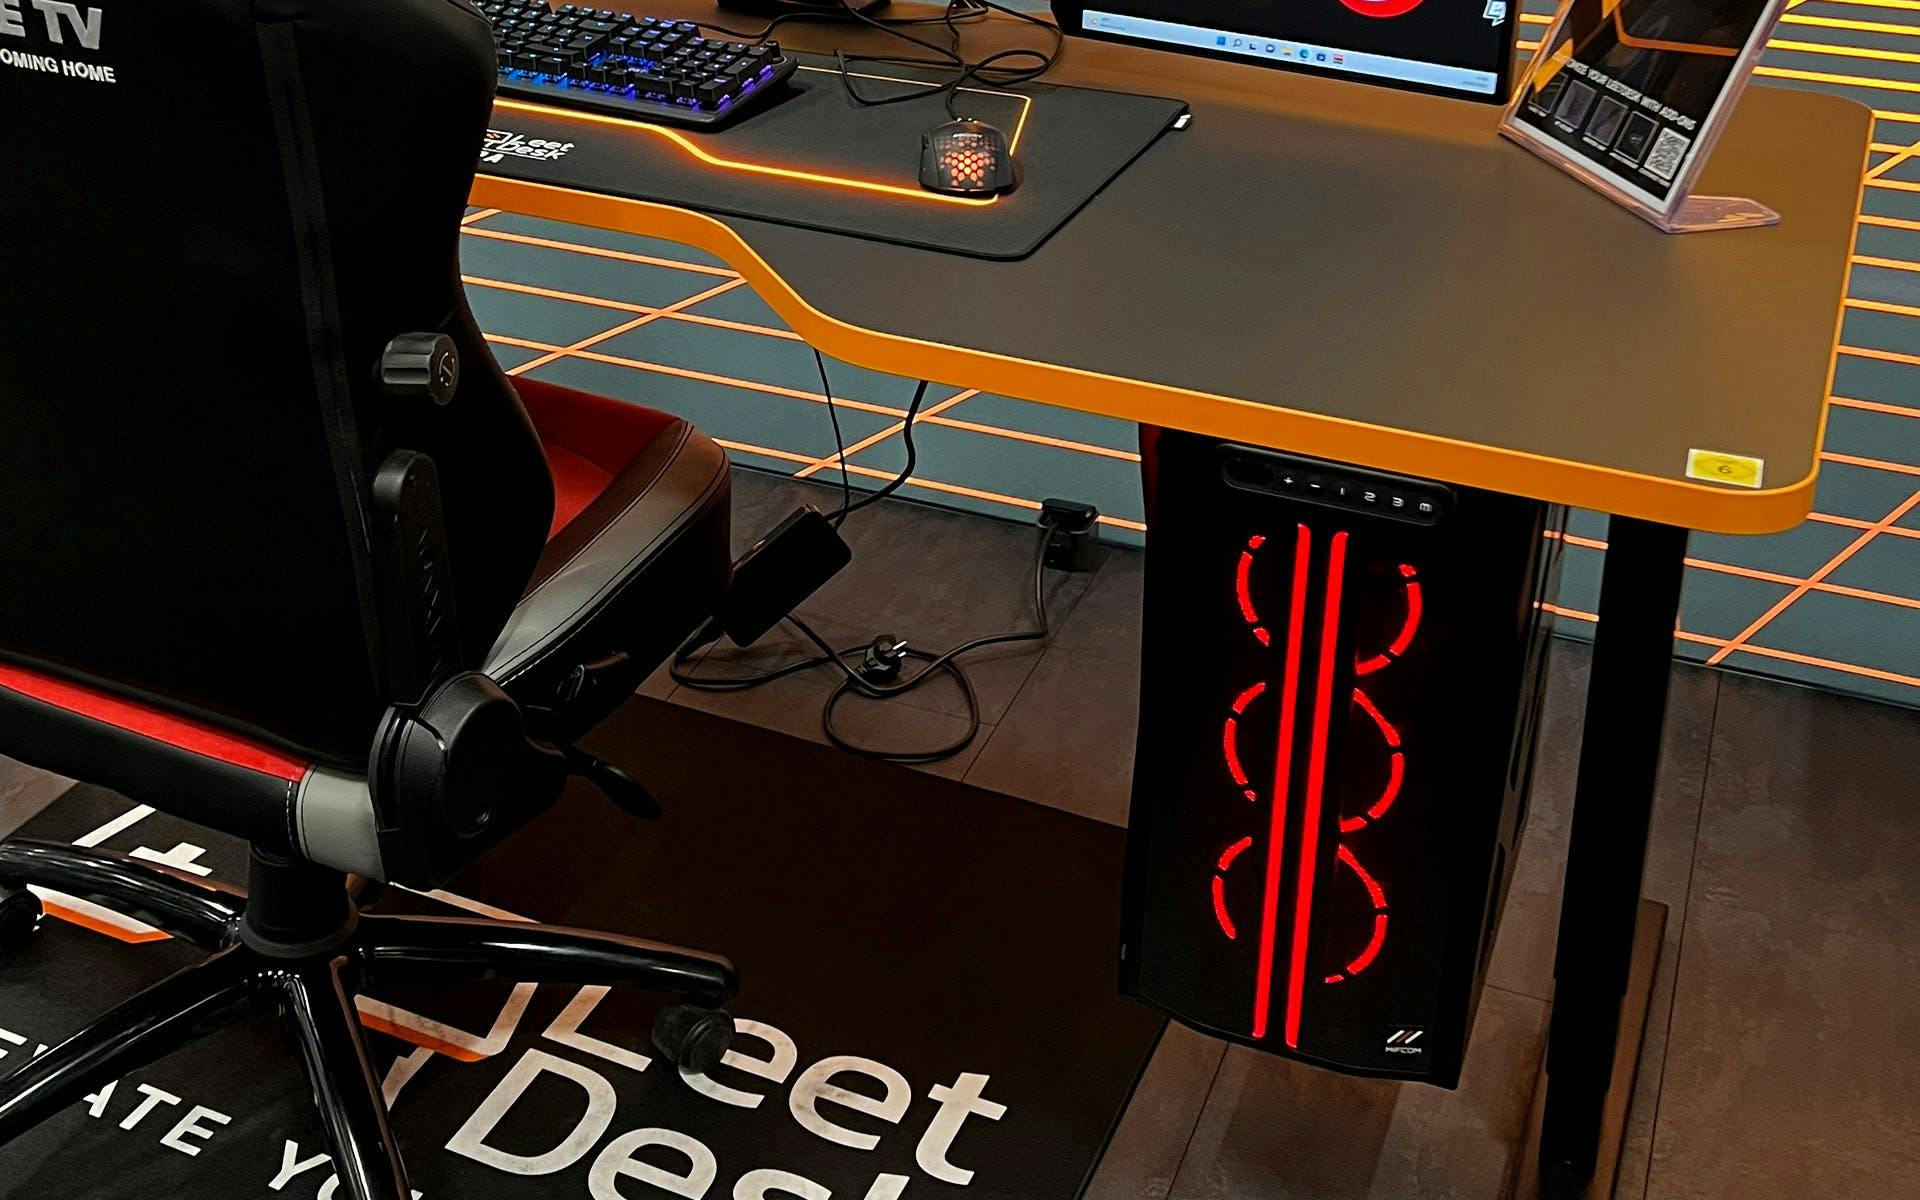 A PC holder creates more space on the desk | Credit: LeetDesk